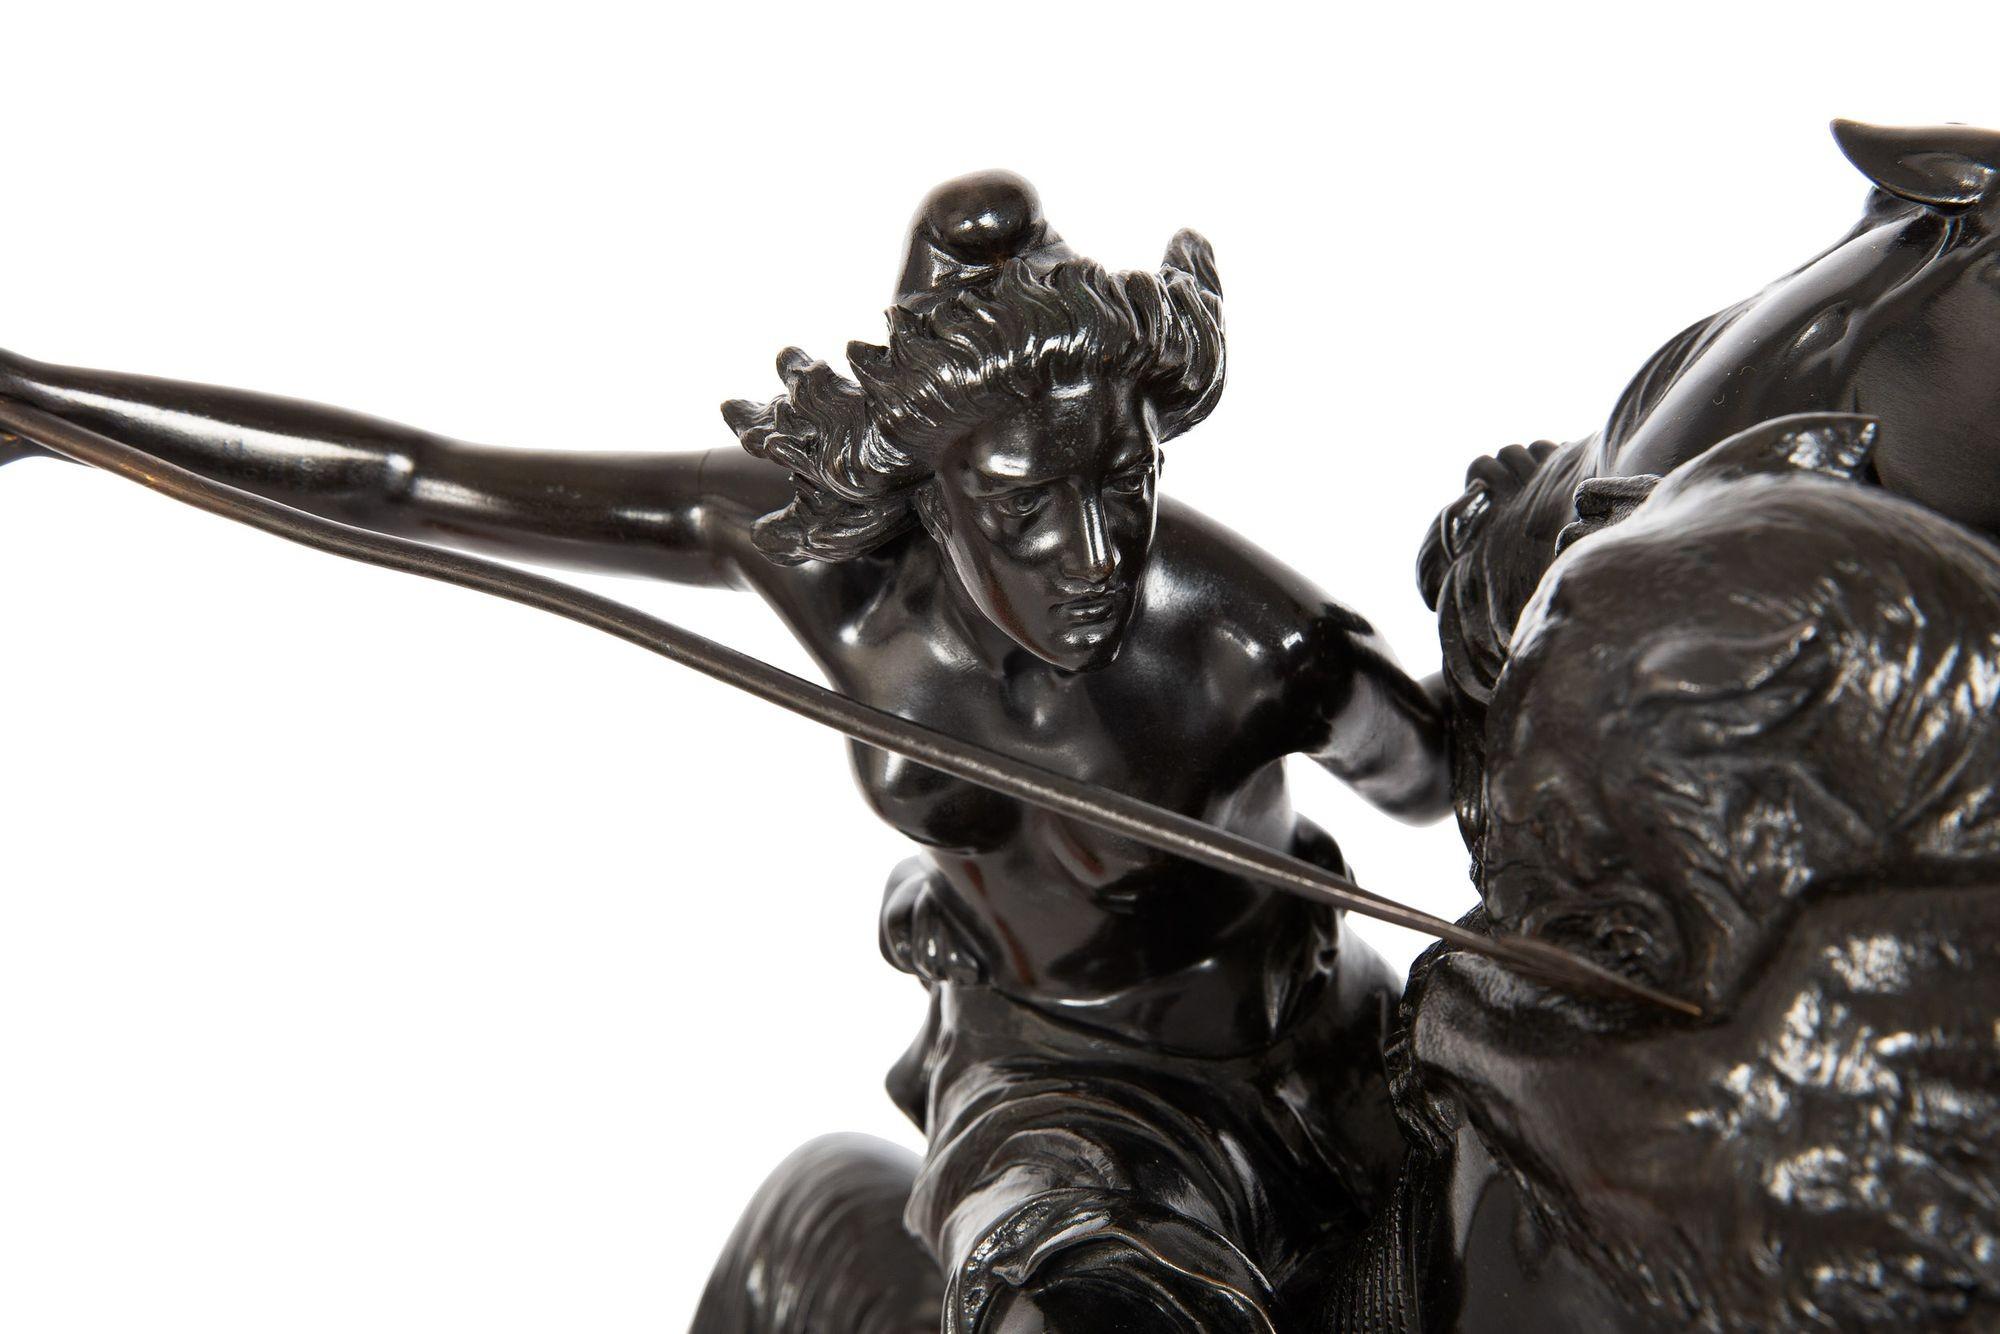 “Amazonian Fighting a Tiger” German Antique Bronze Sculpture by August Kiss In Good Condition For Sale In Shippensburg, PA